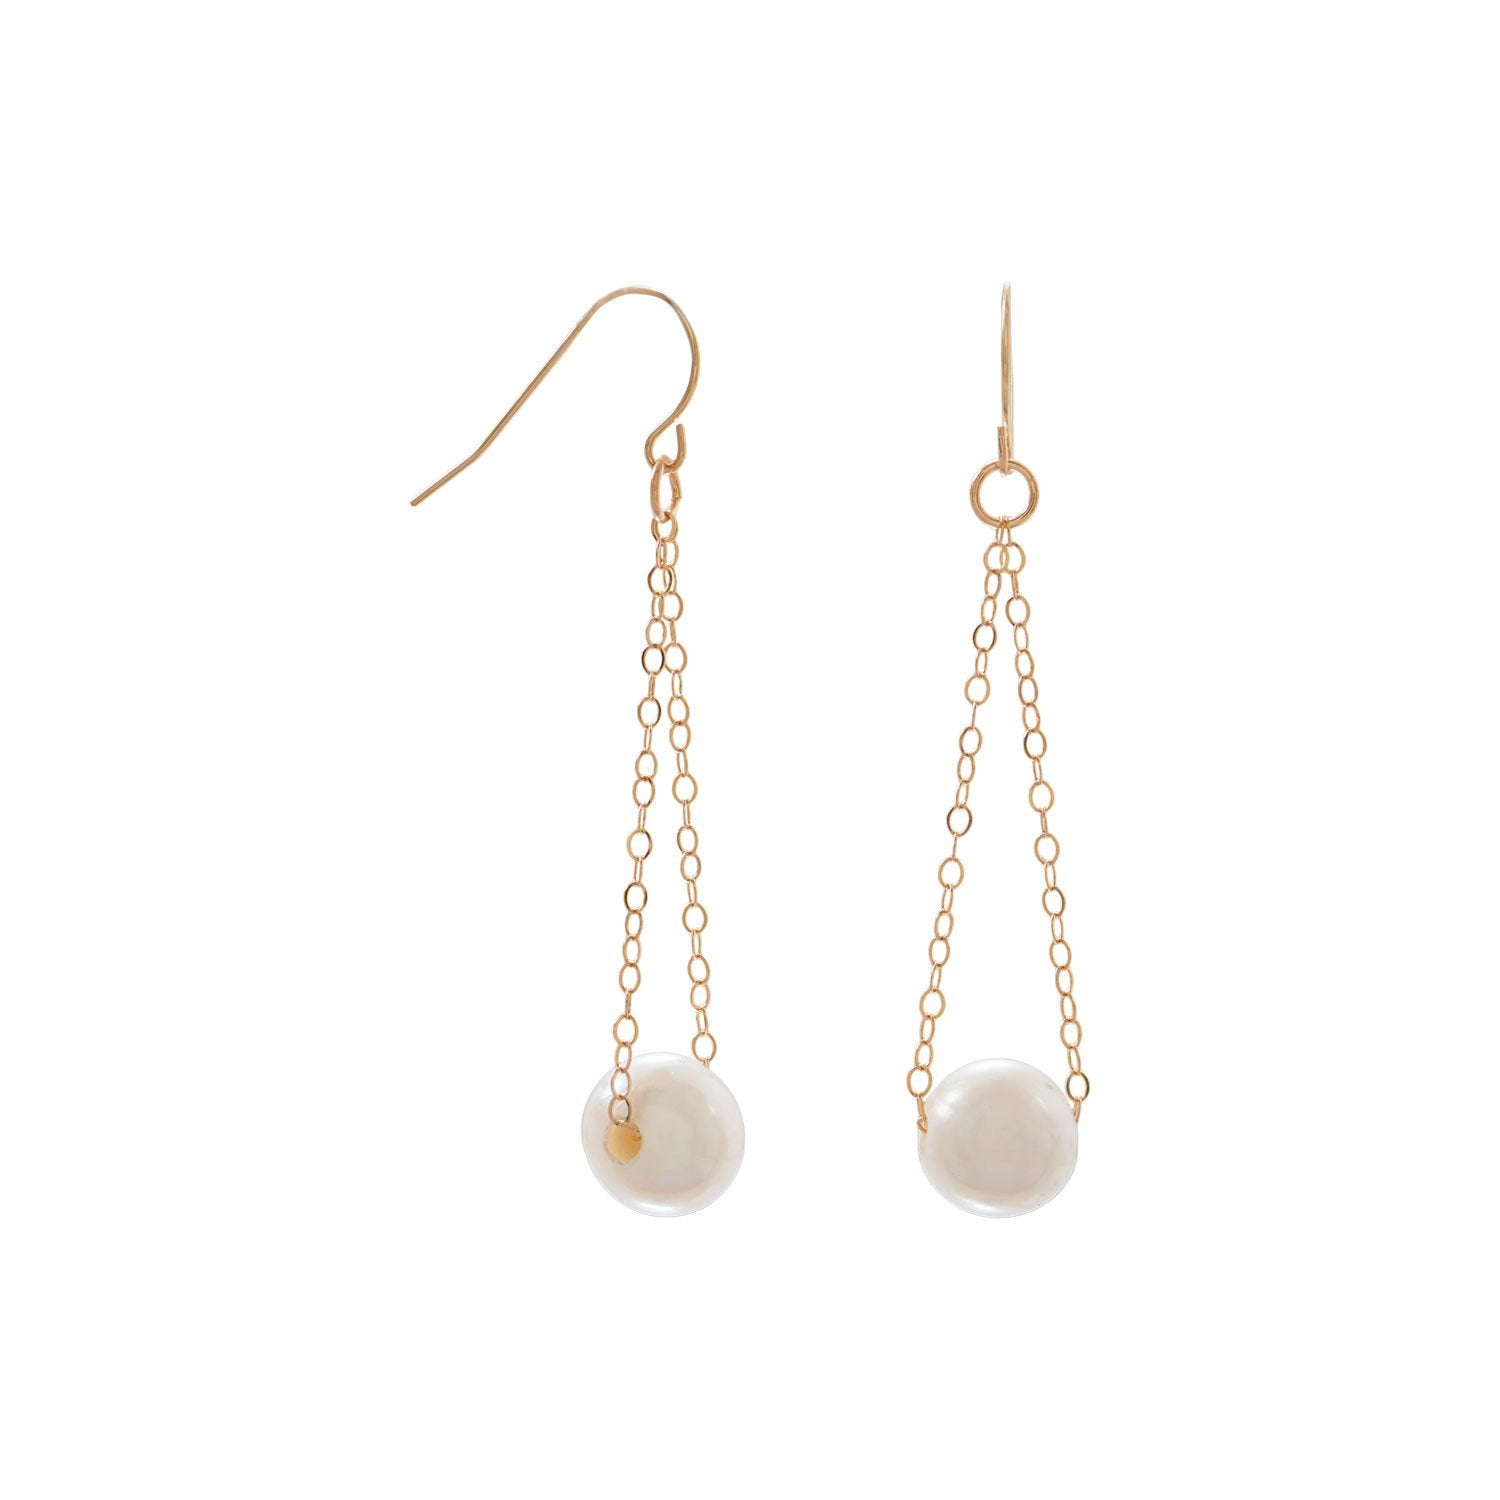 14 Karat Gold French Wire Earrings with Floating Cultured Freshwater Pearl - Joyeria Lady